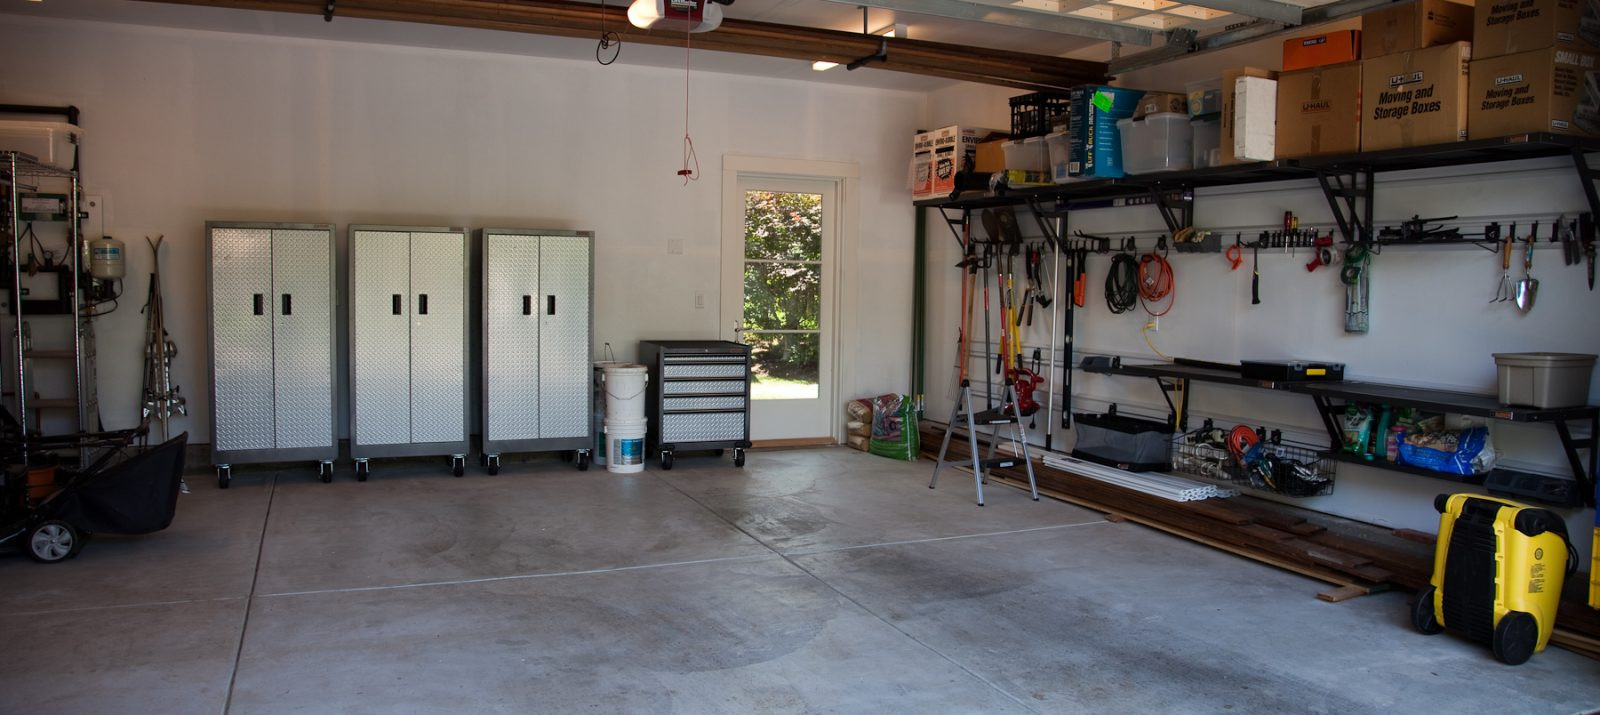 Best Way To Organize Garage
 How To Easily Clean And Organize Your Garage [Infographic]